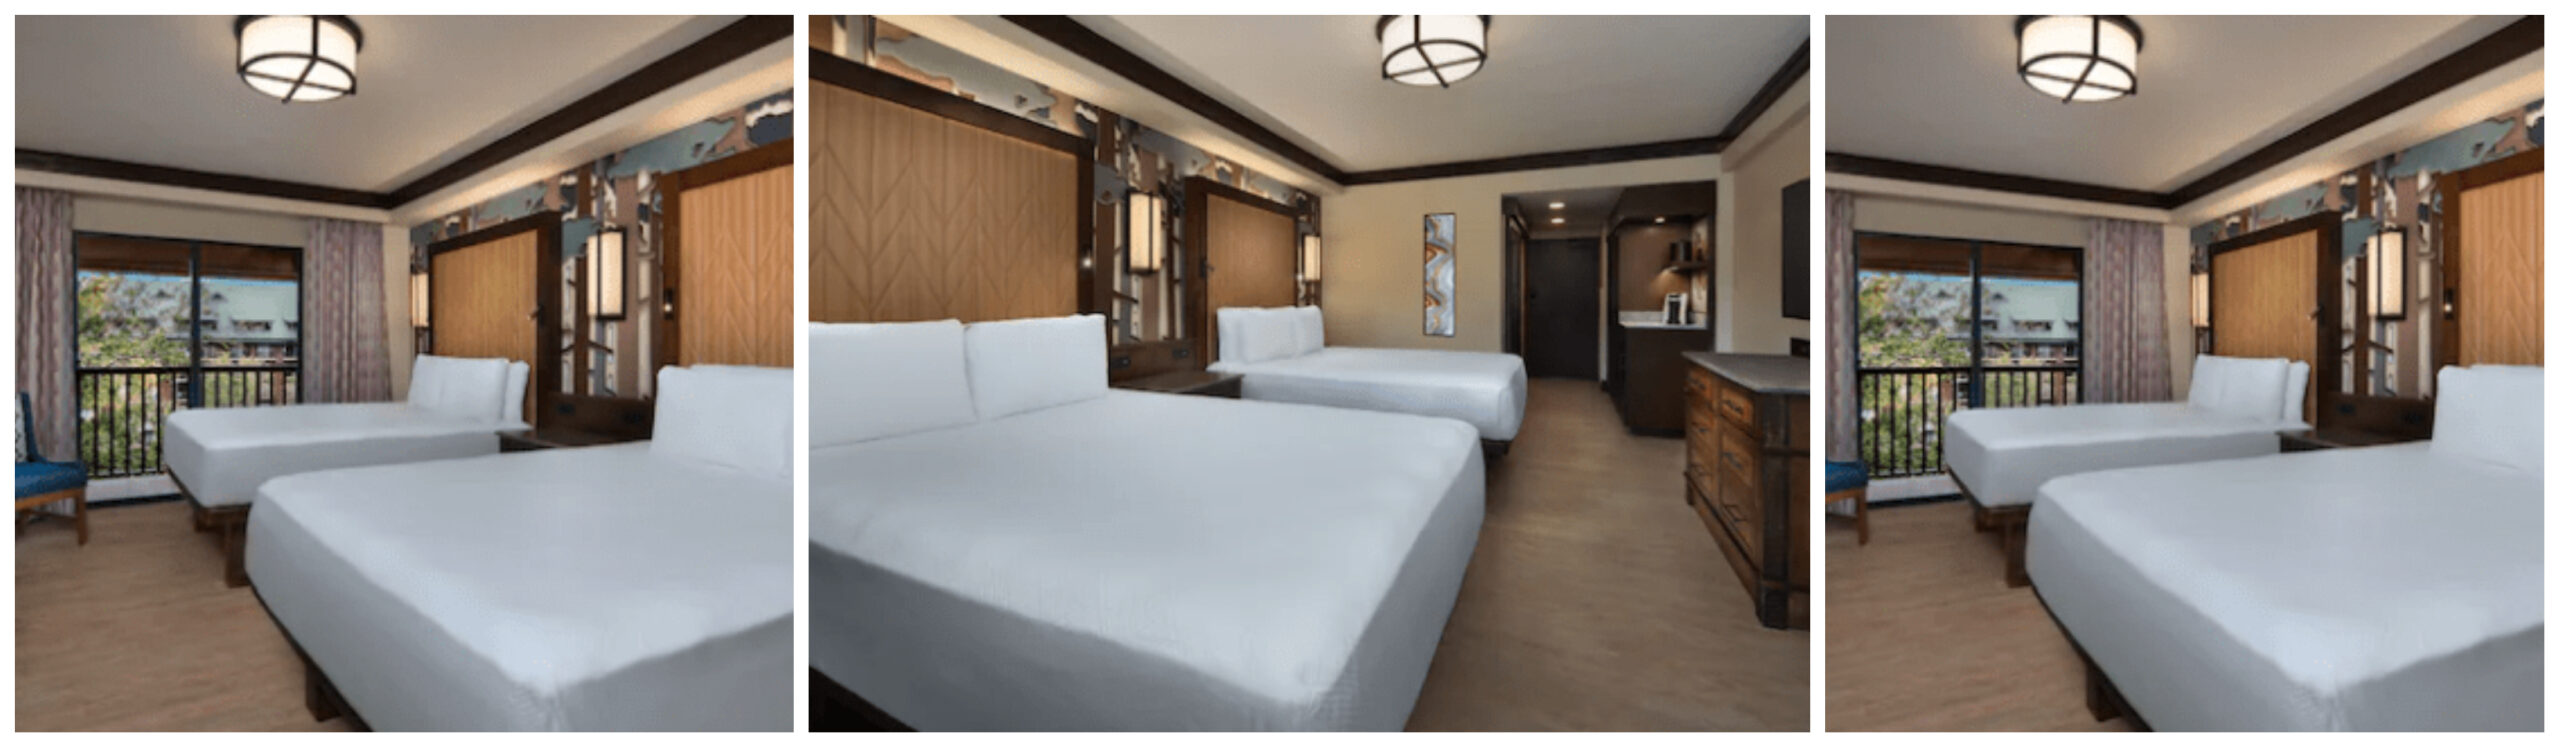 First look at newly renovated rooms at Wilderness Lodge